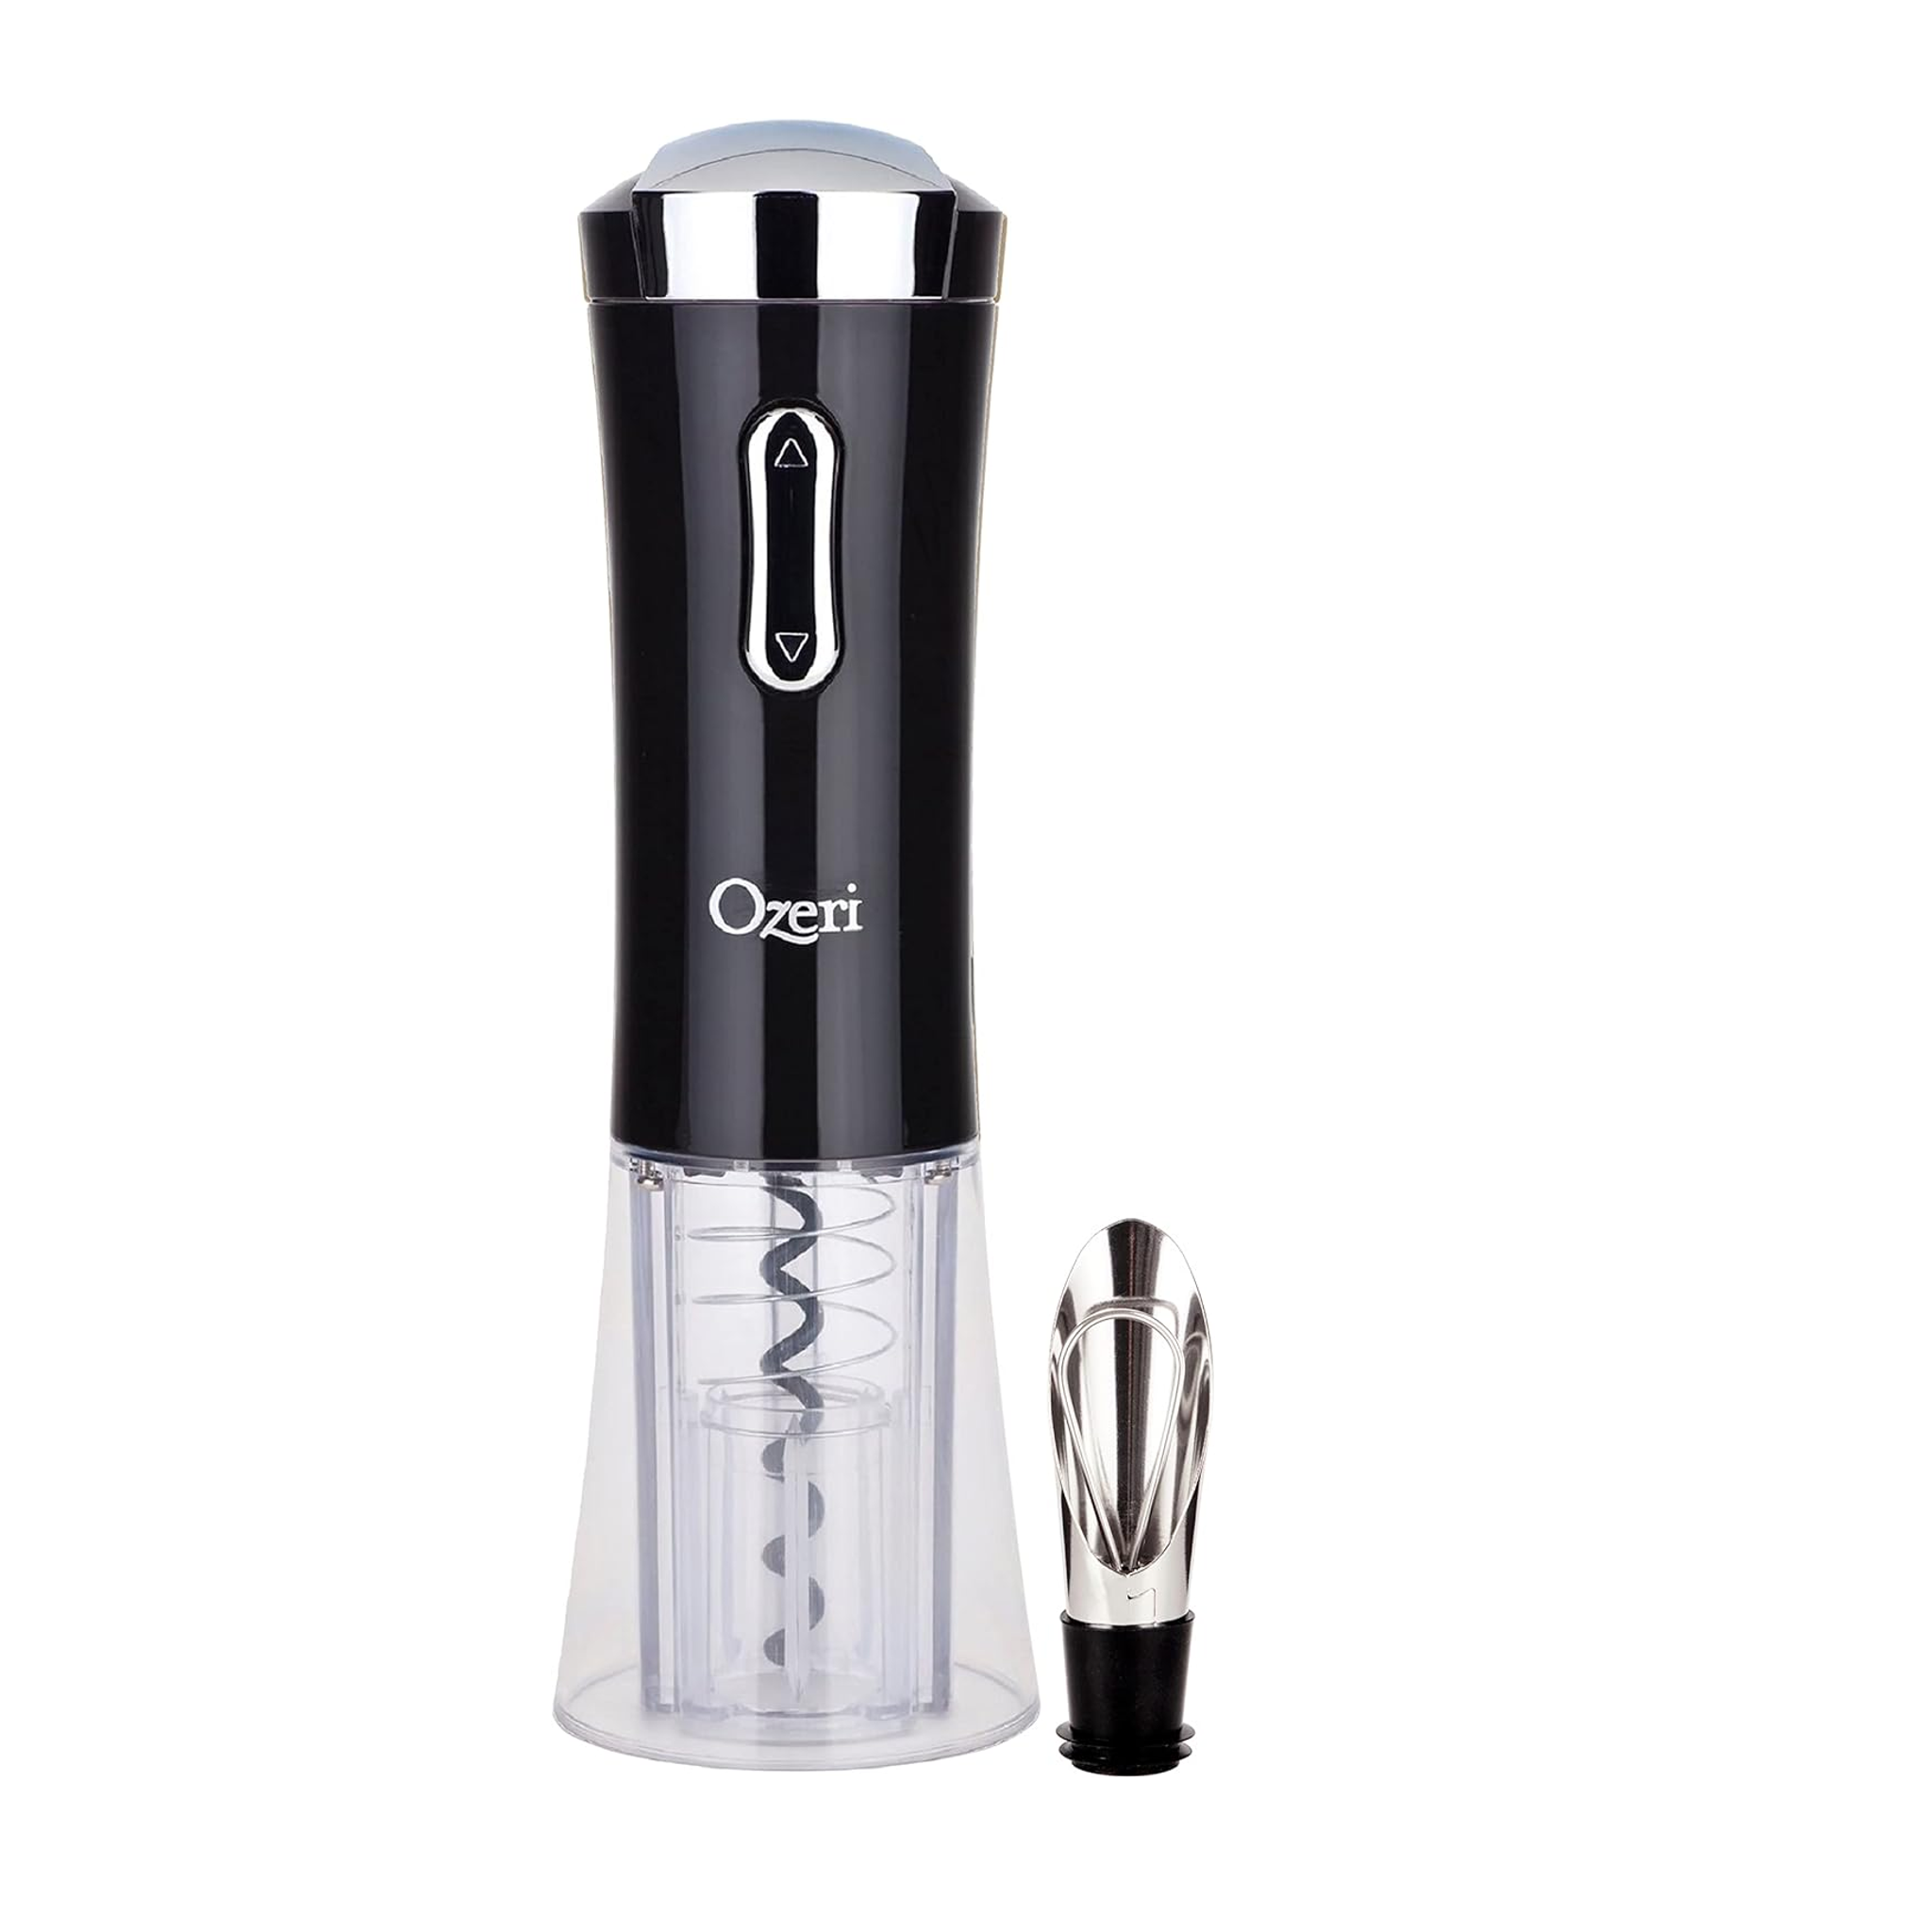 Electric Wine Opener with Foil Cutter, Wine Pourer, & Stopper